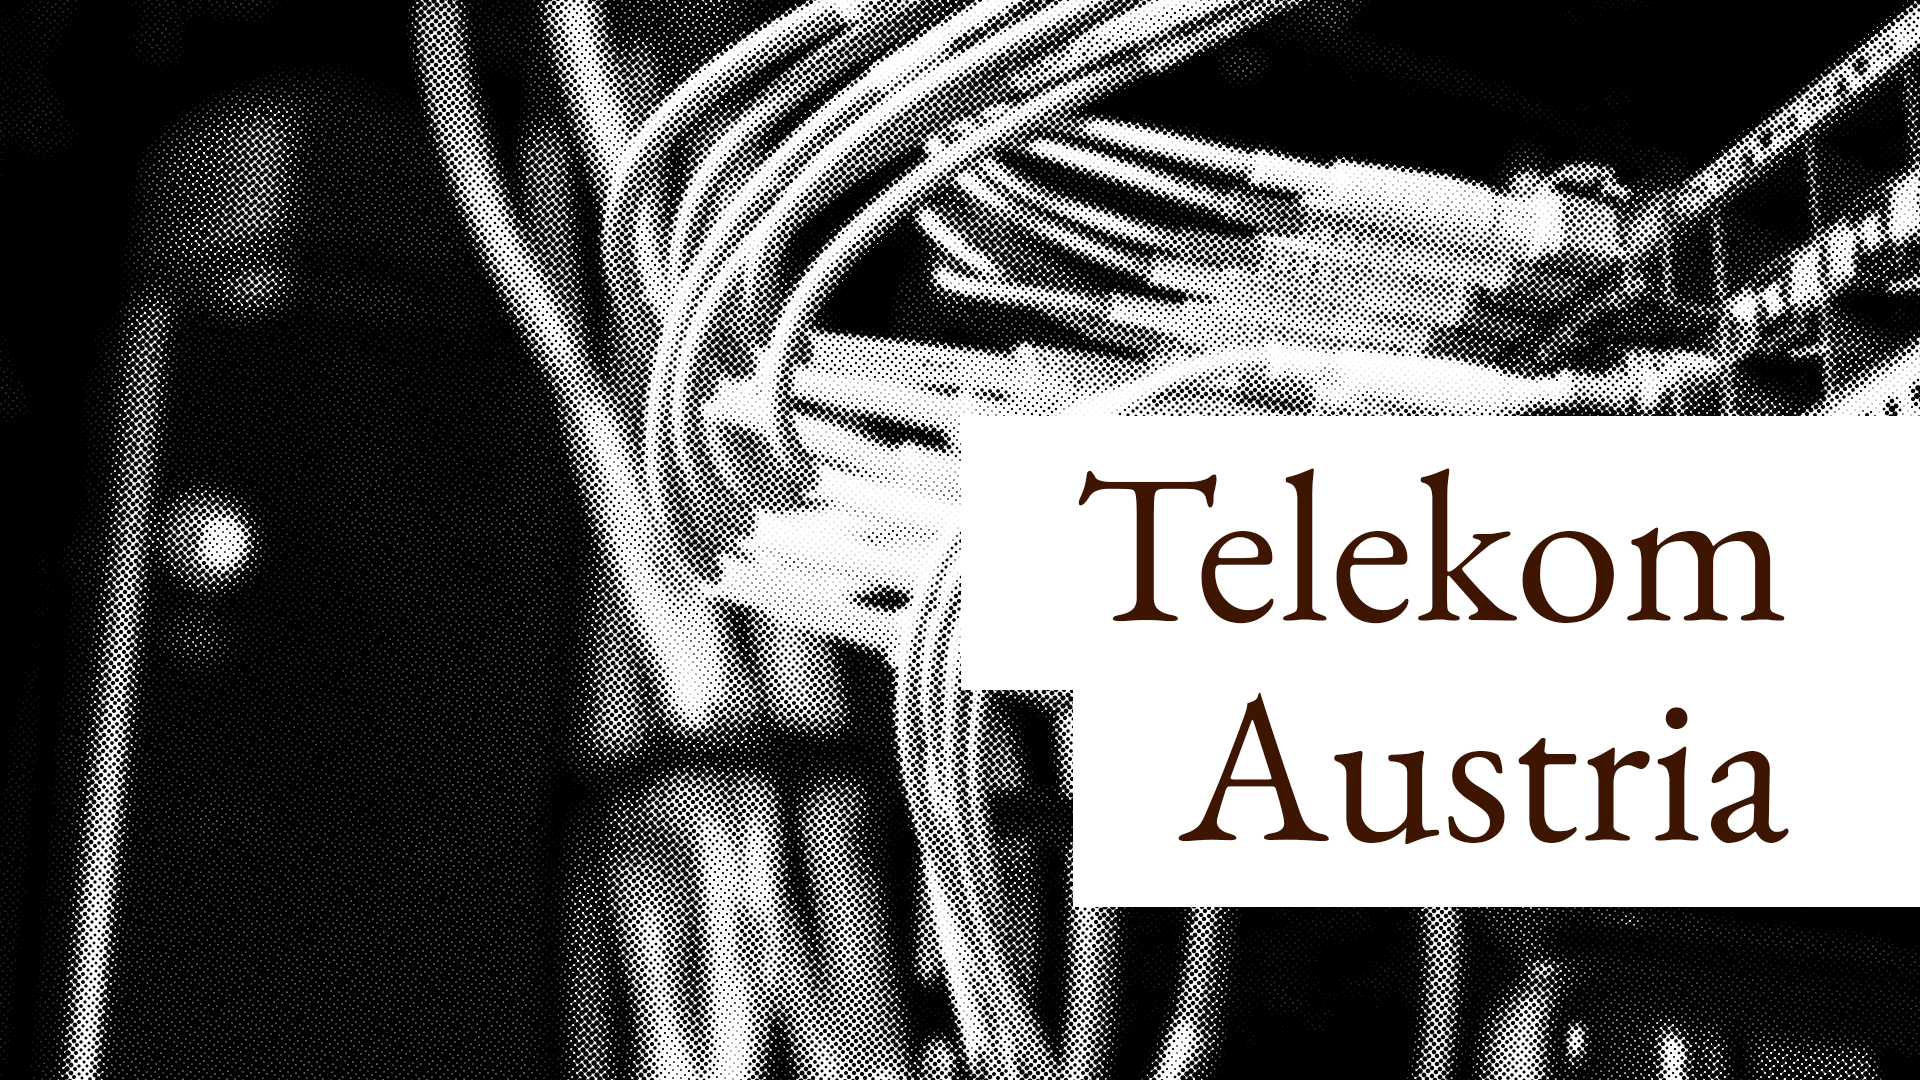 Telekom Austria with good value and broad buy recommendations